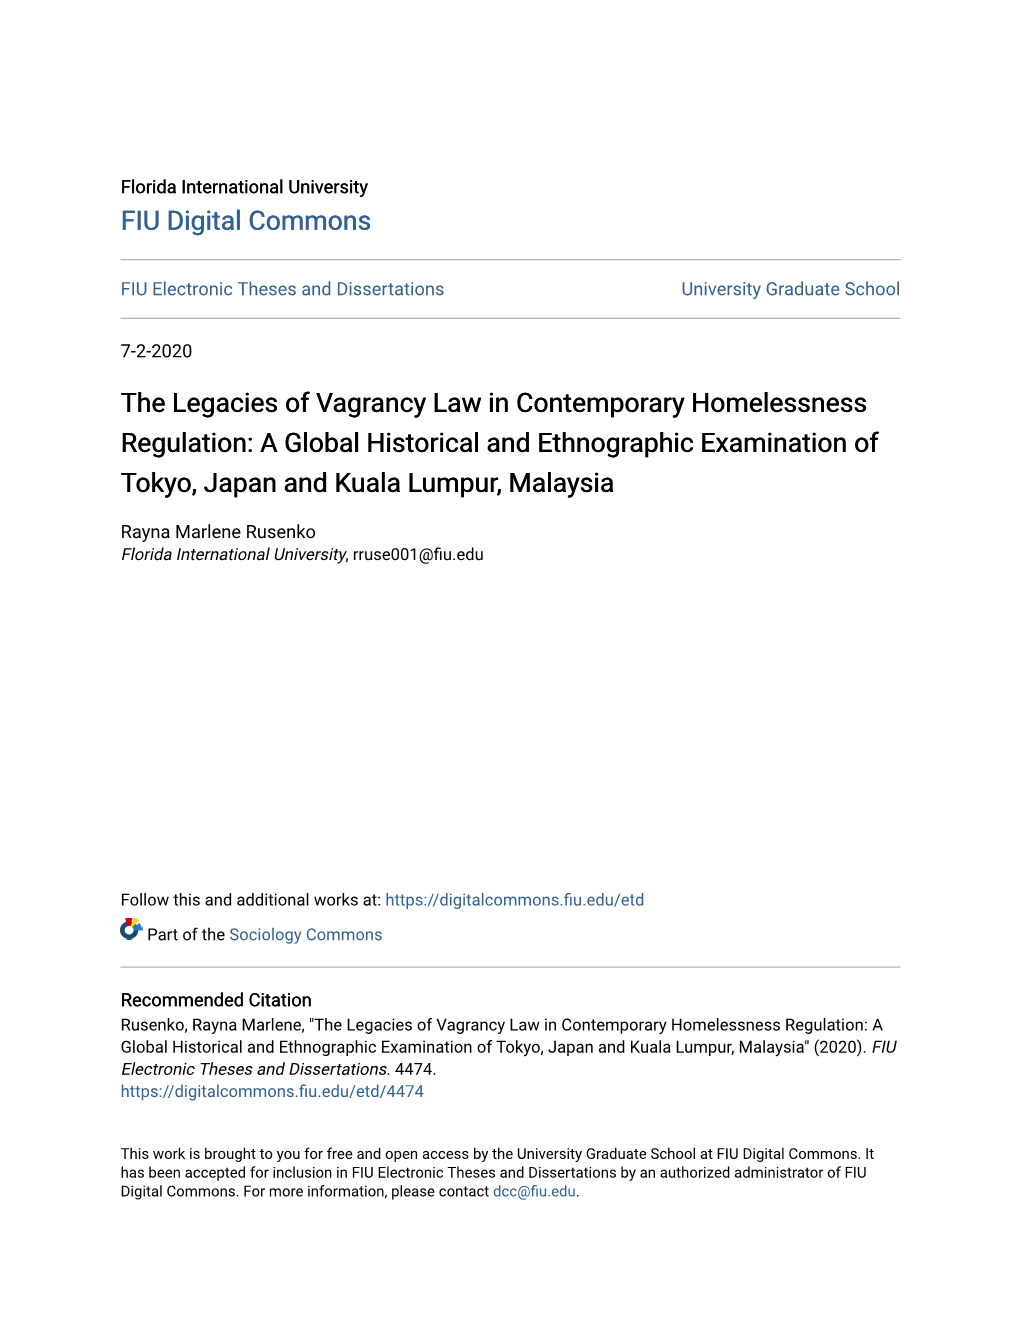 The Legacies of Vagrancy Law in Contemporary Homelessness Regulation: a Global Historical and Ethnographic Examination of Tokyo, Japan and Kuala Lumpur, Malaysia